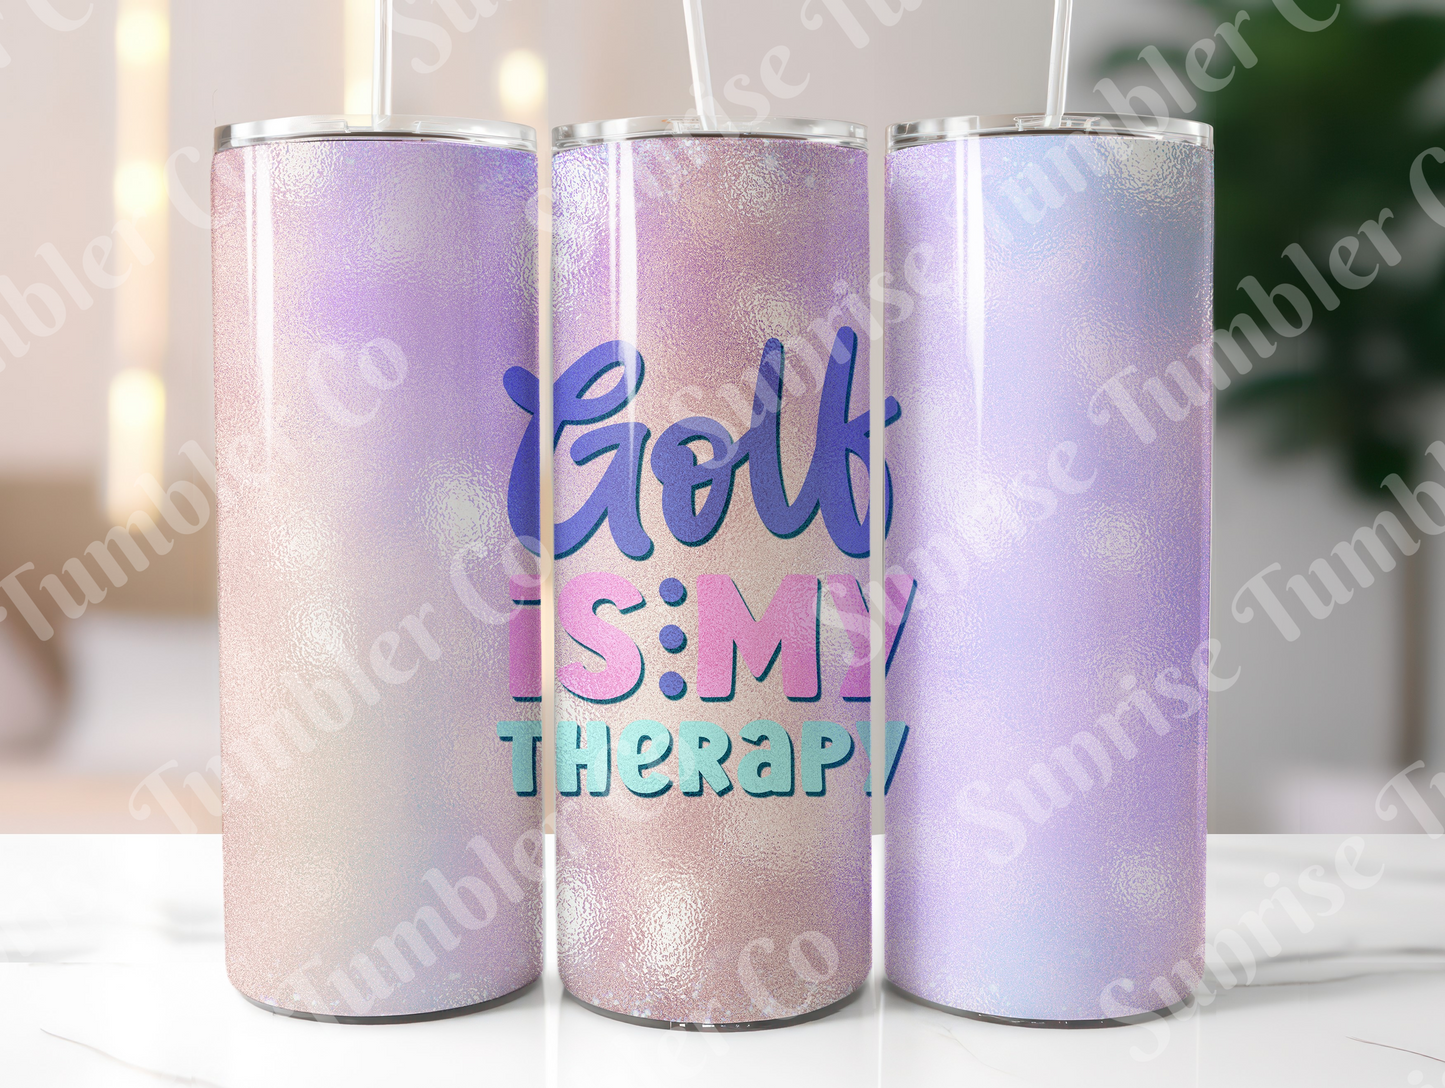 Golf Variety Part 3 - 20oz and 30oz Tumblers (Glow In The Dark Green And Blue Available)